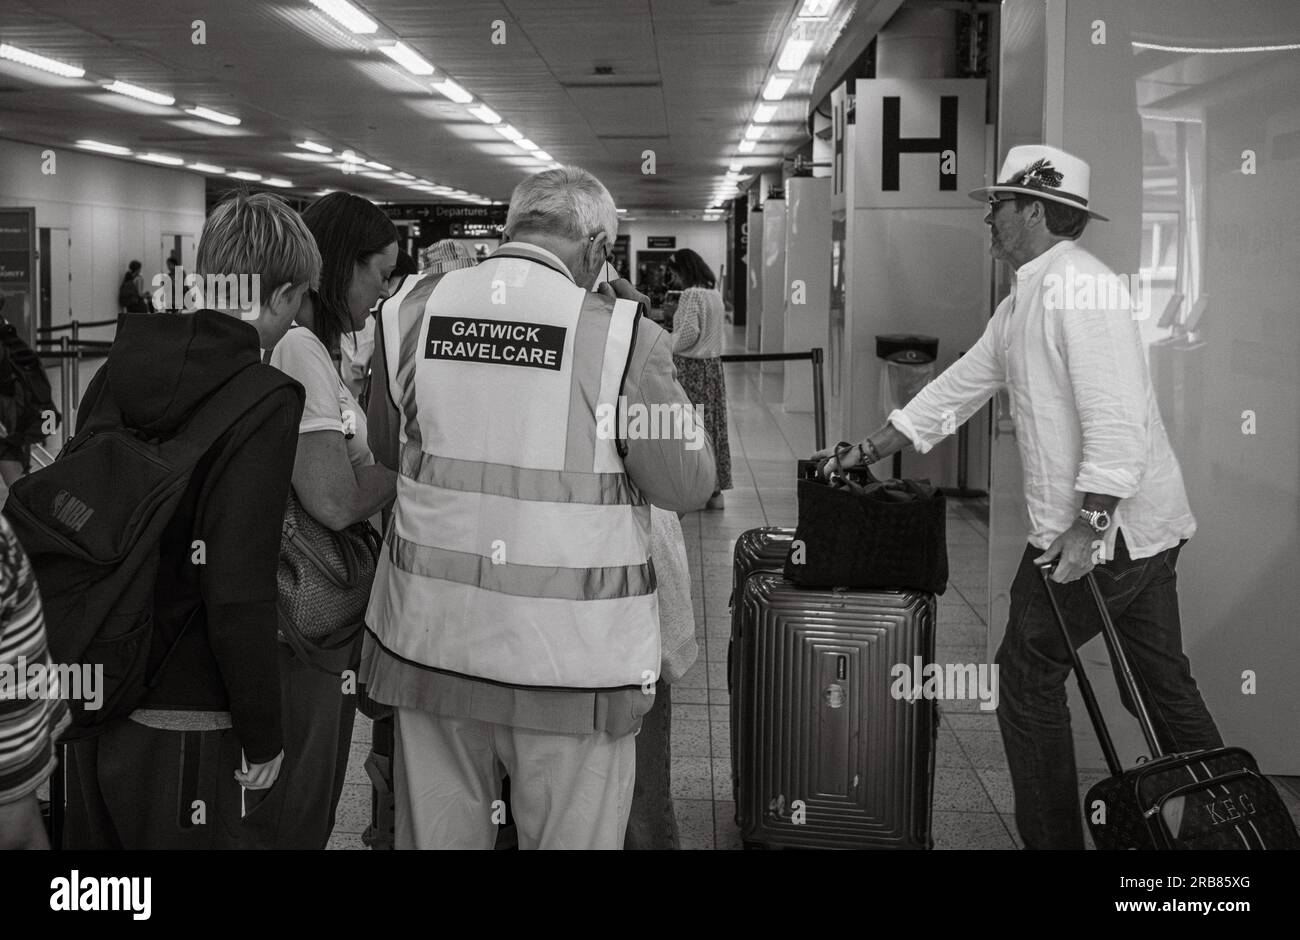 A volunteer with Gatwick Travelcare assists travellers at London Gatwick Airport South Terminal, West Sussex, UK. Gatwick Travelcare is staffed by vol Stock Photo